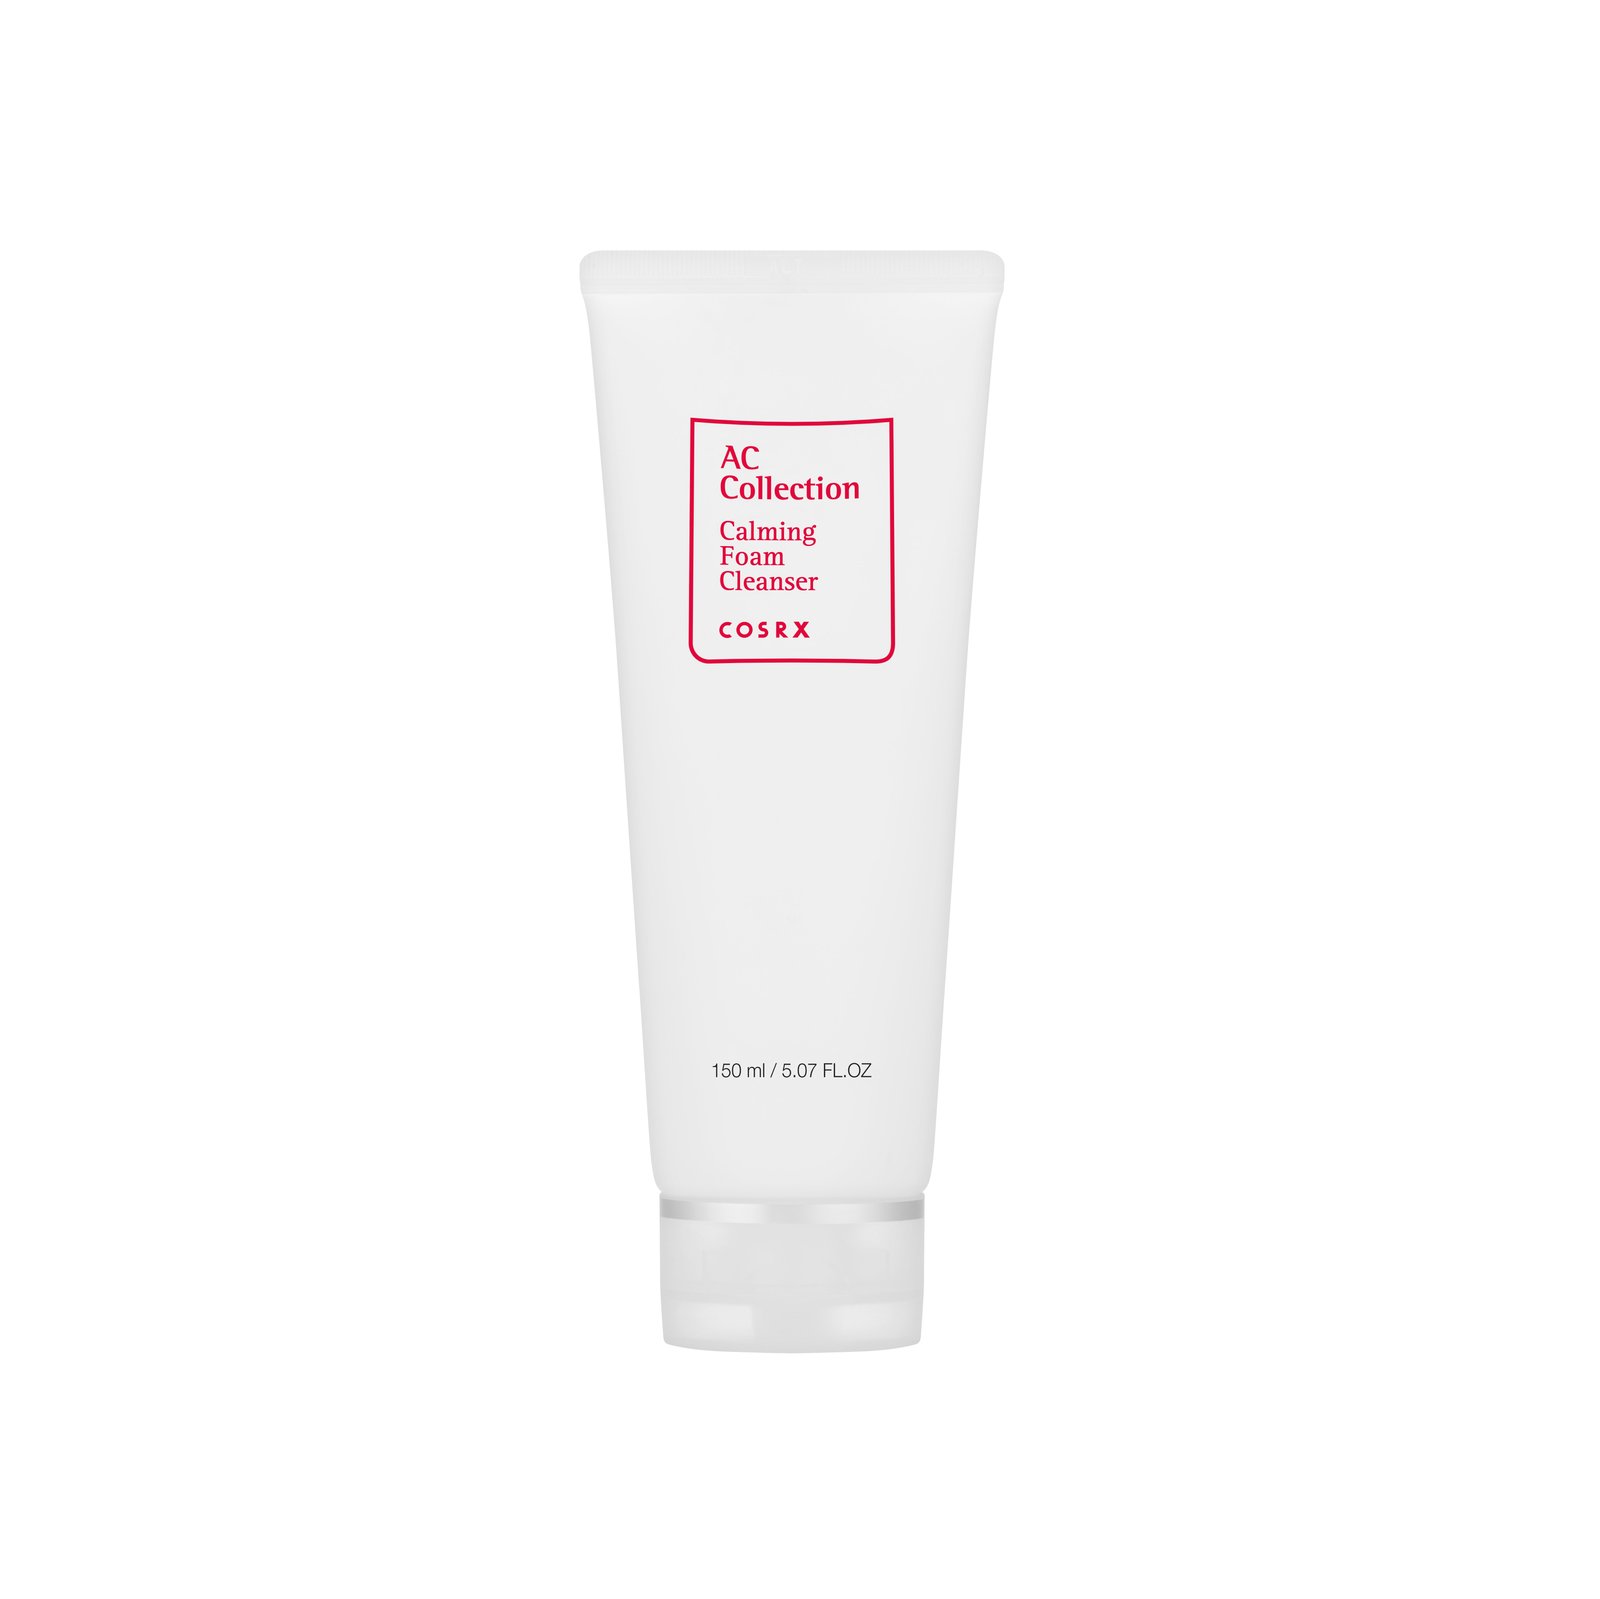 COSRX AC Collection Calming Foam Cleanser 2.0 150ml